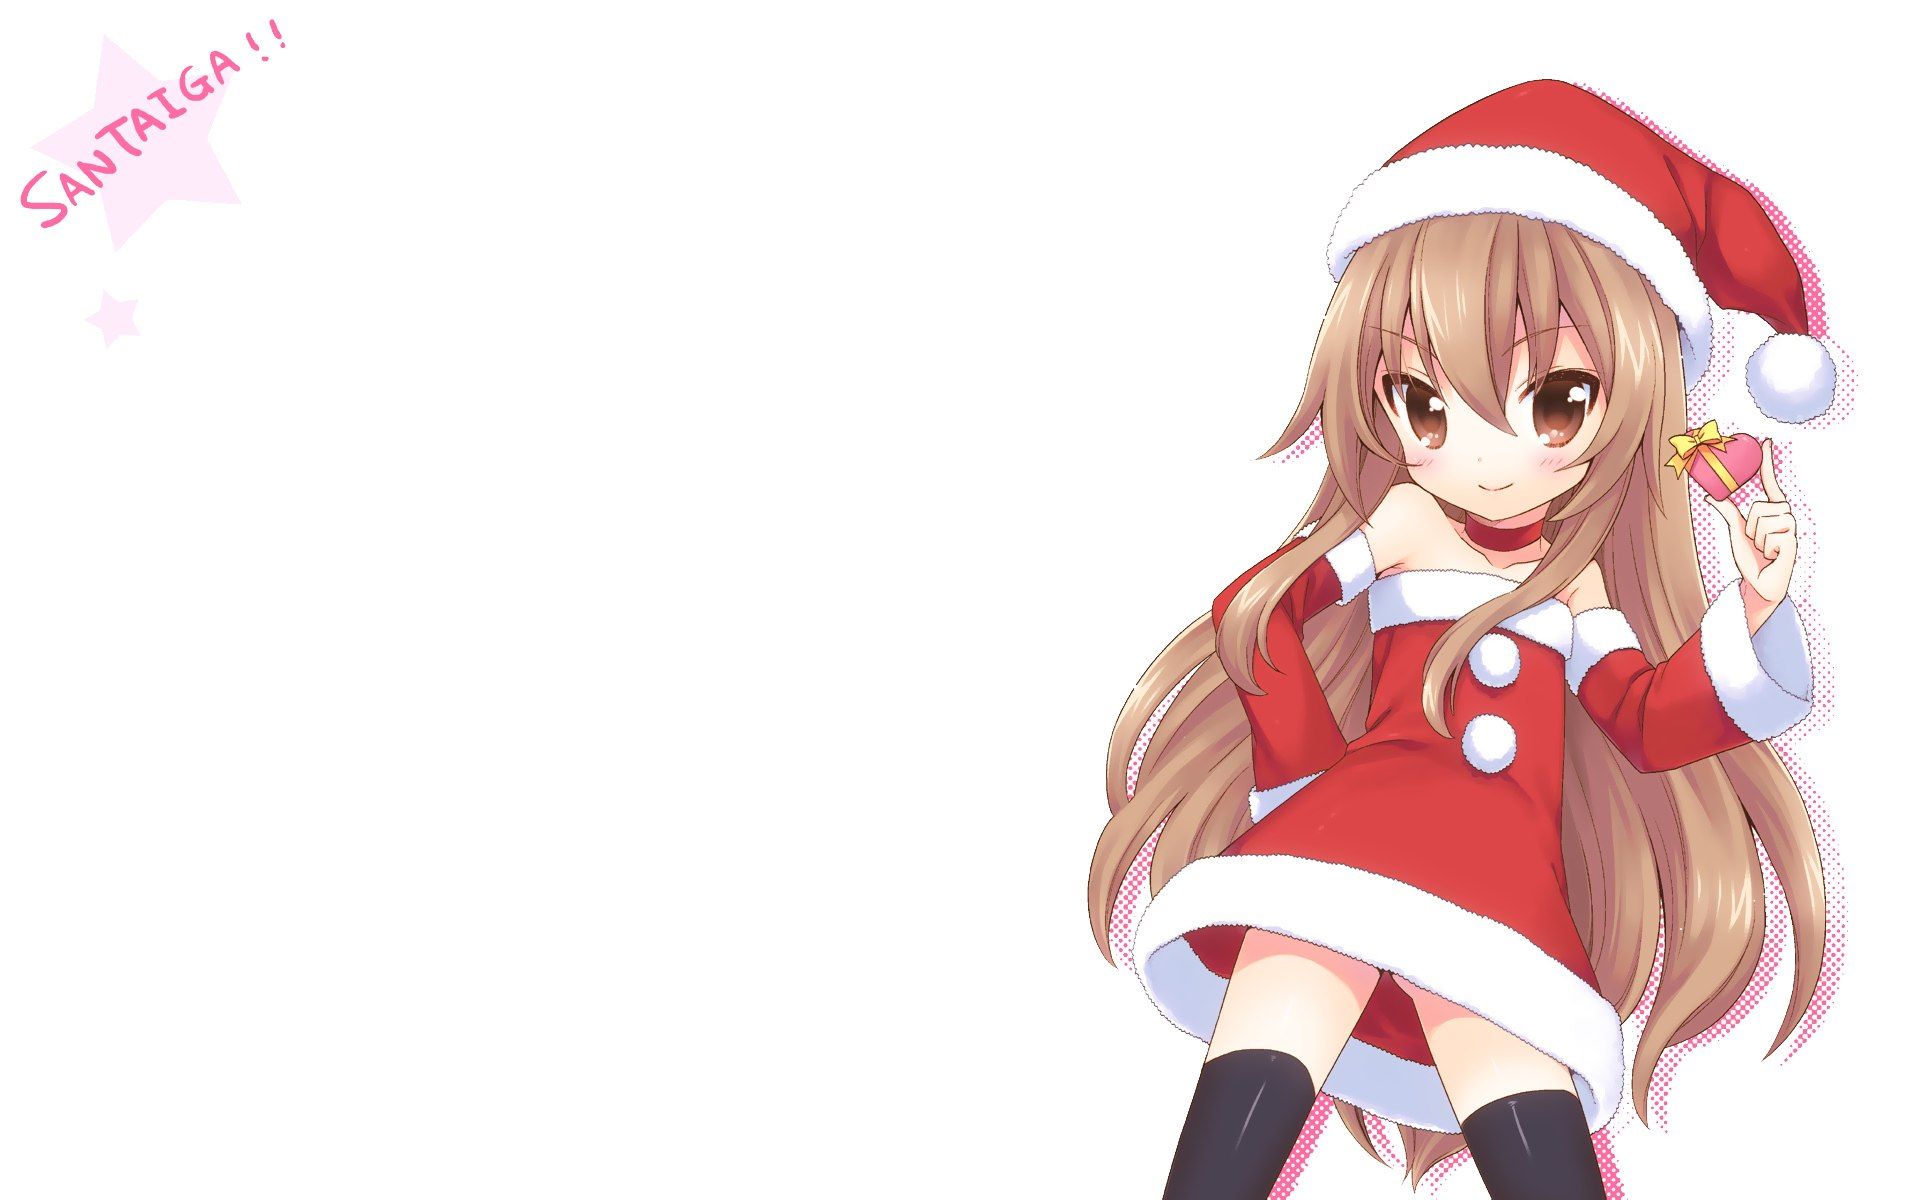 Taiga aisaka wallpaper 1920x1200 - - High Quality and other